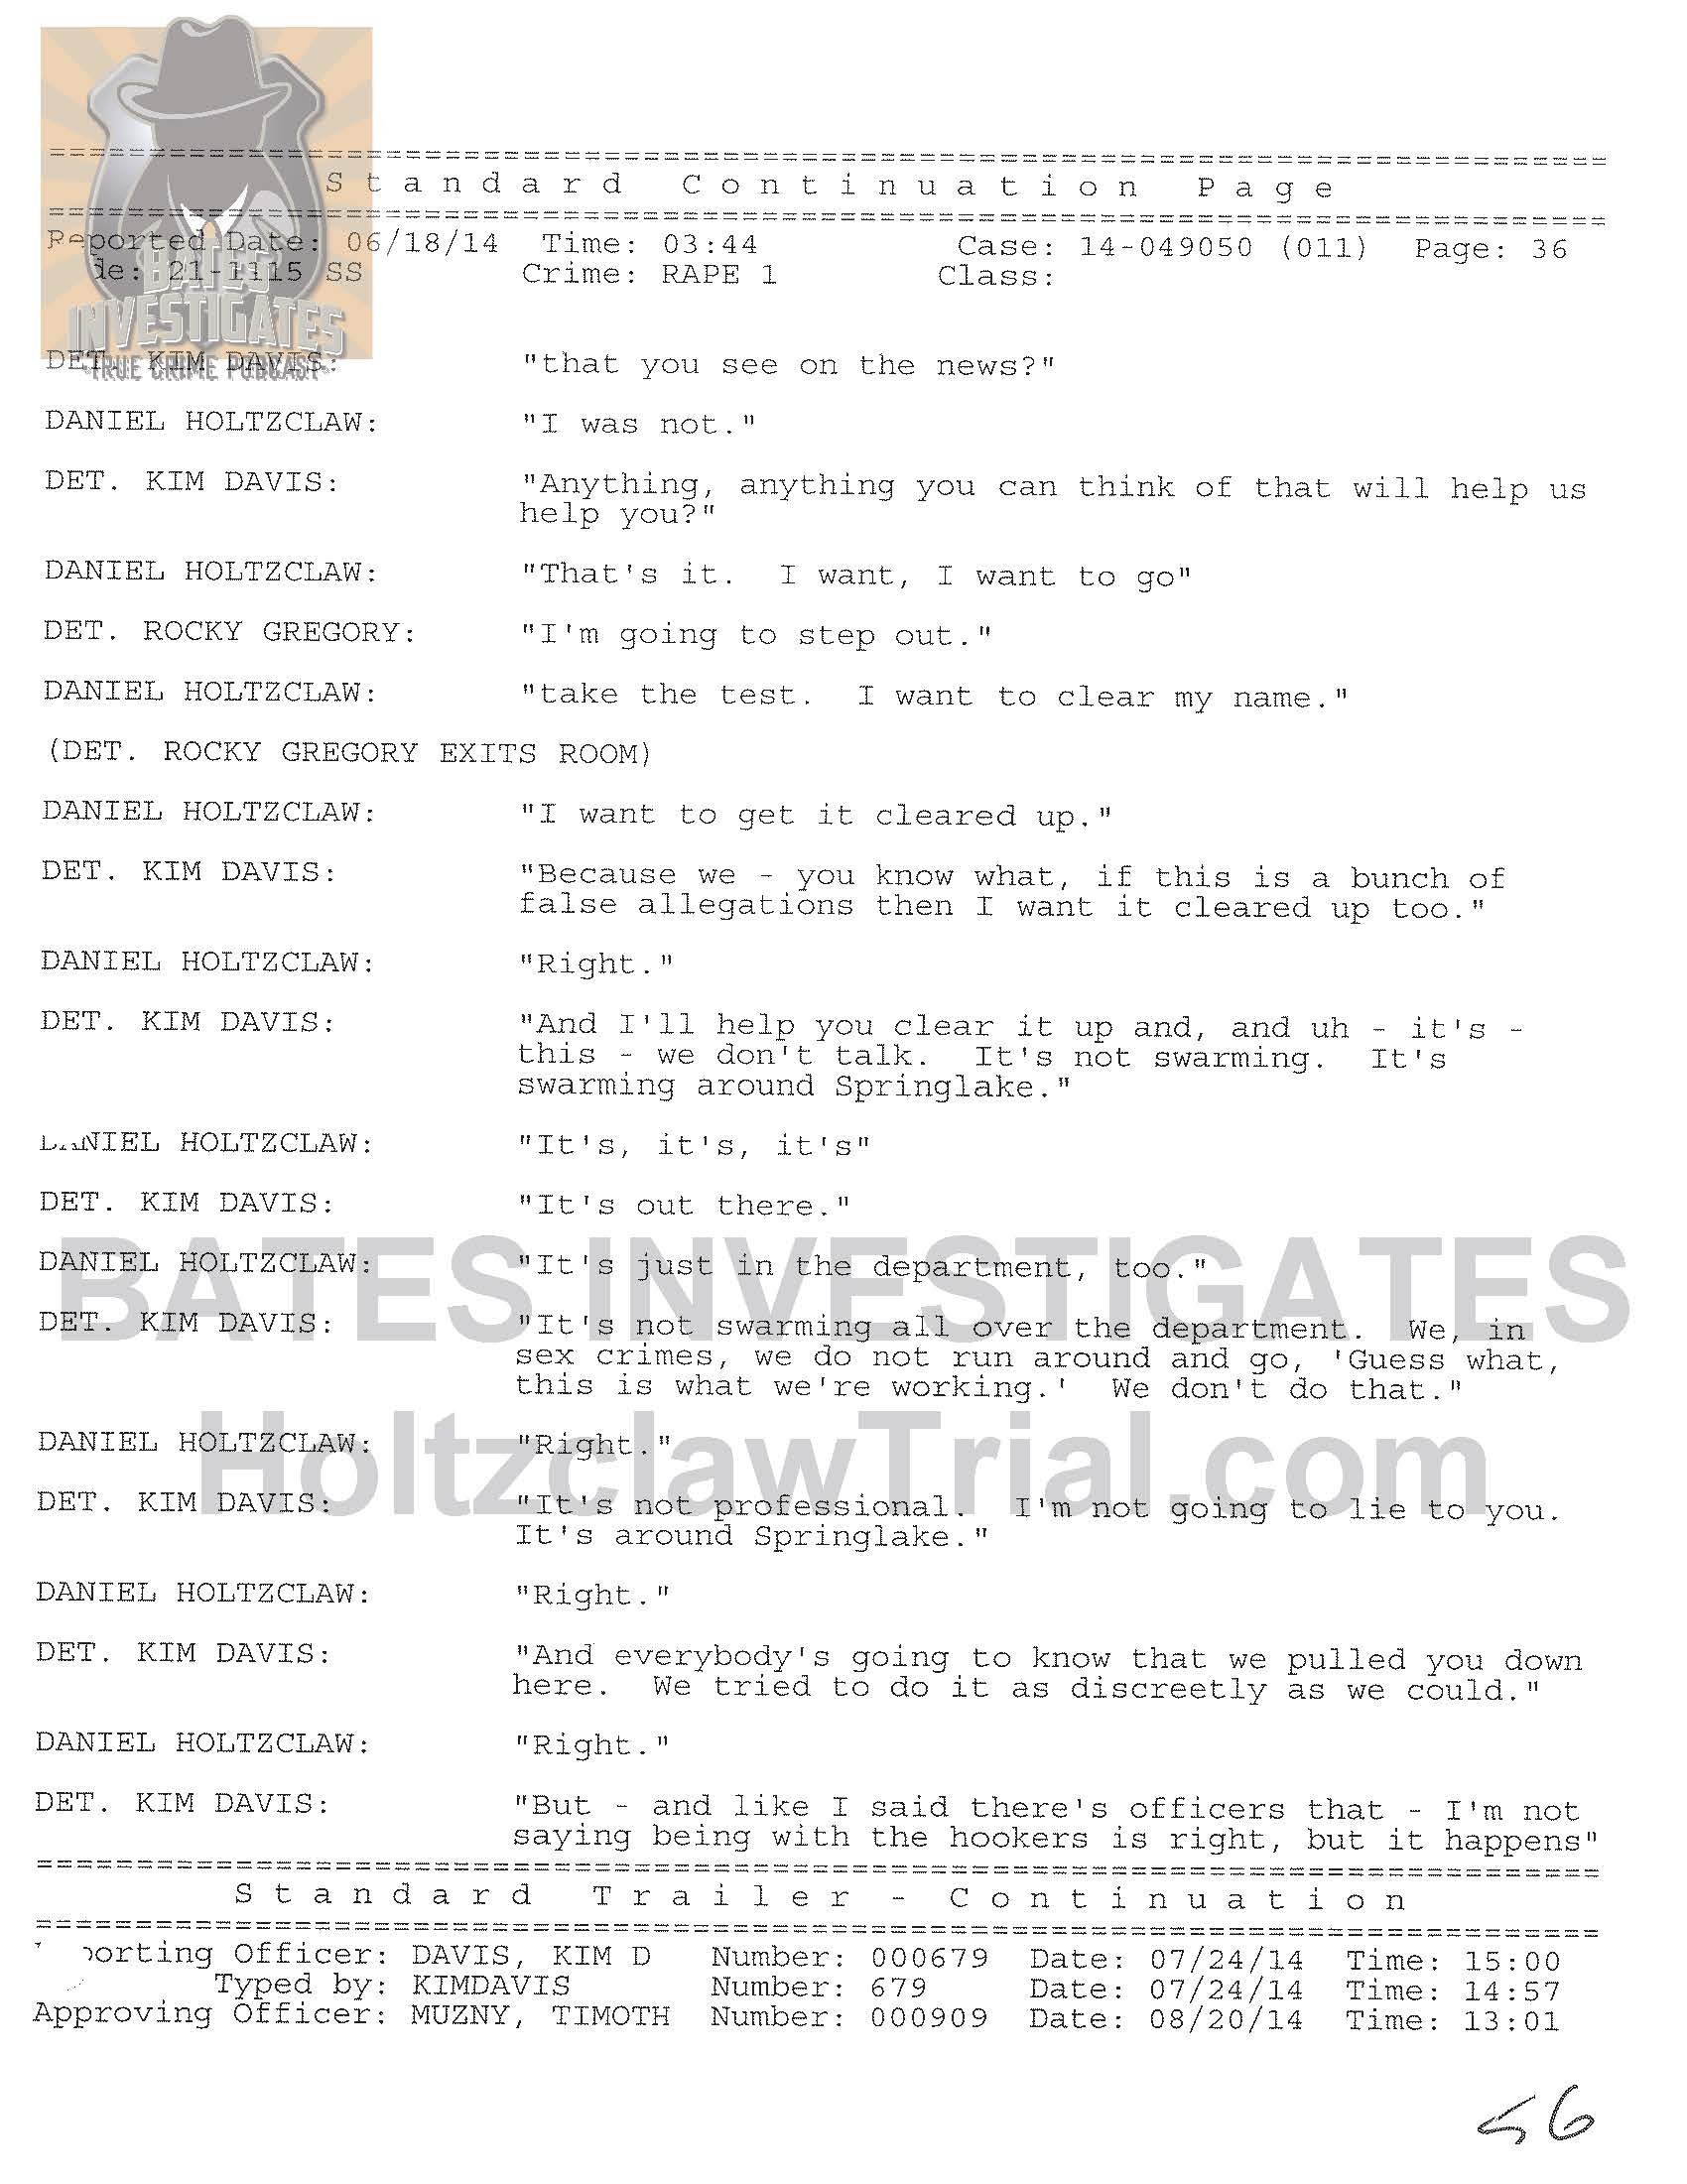 Holtzclaw Interrogation Transcript - Ep02 Redacted_Page_36.jpg